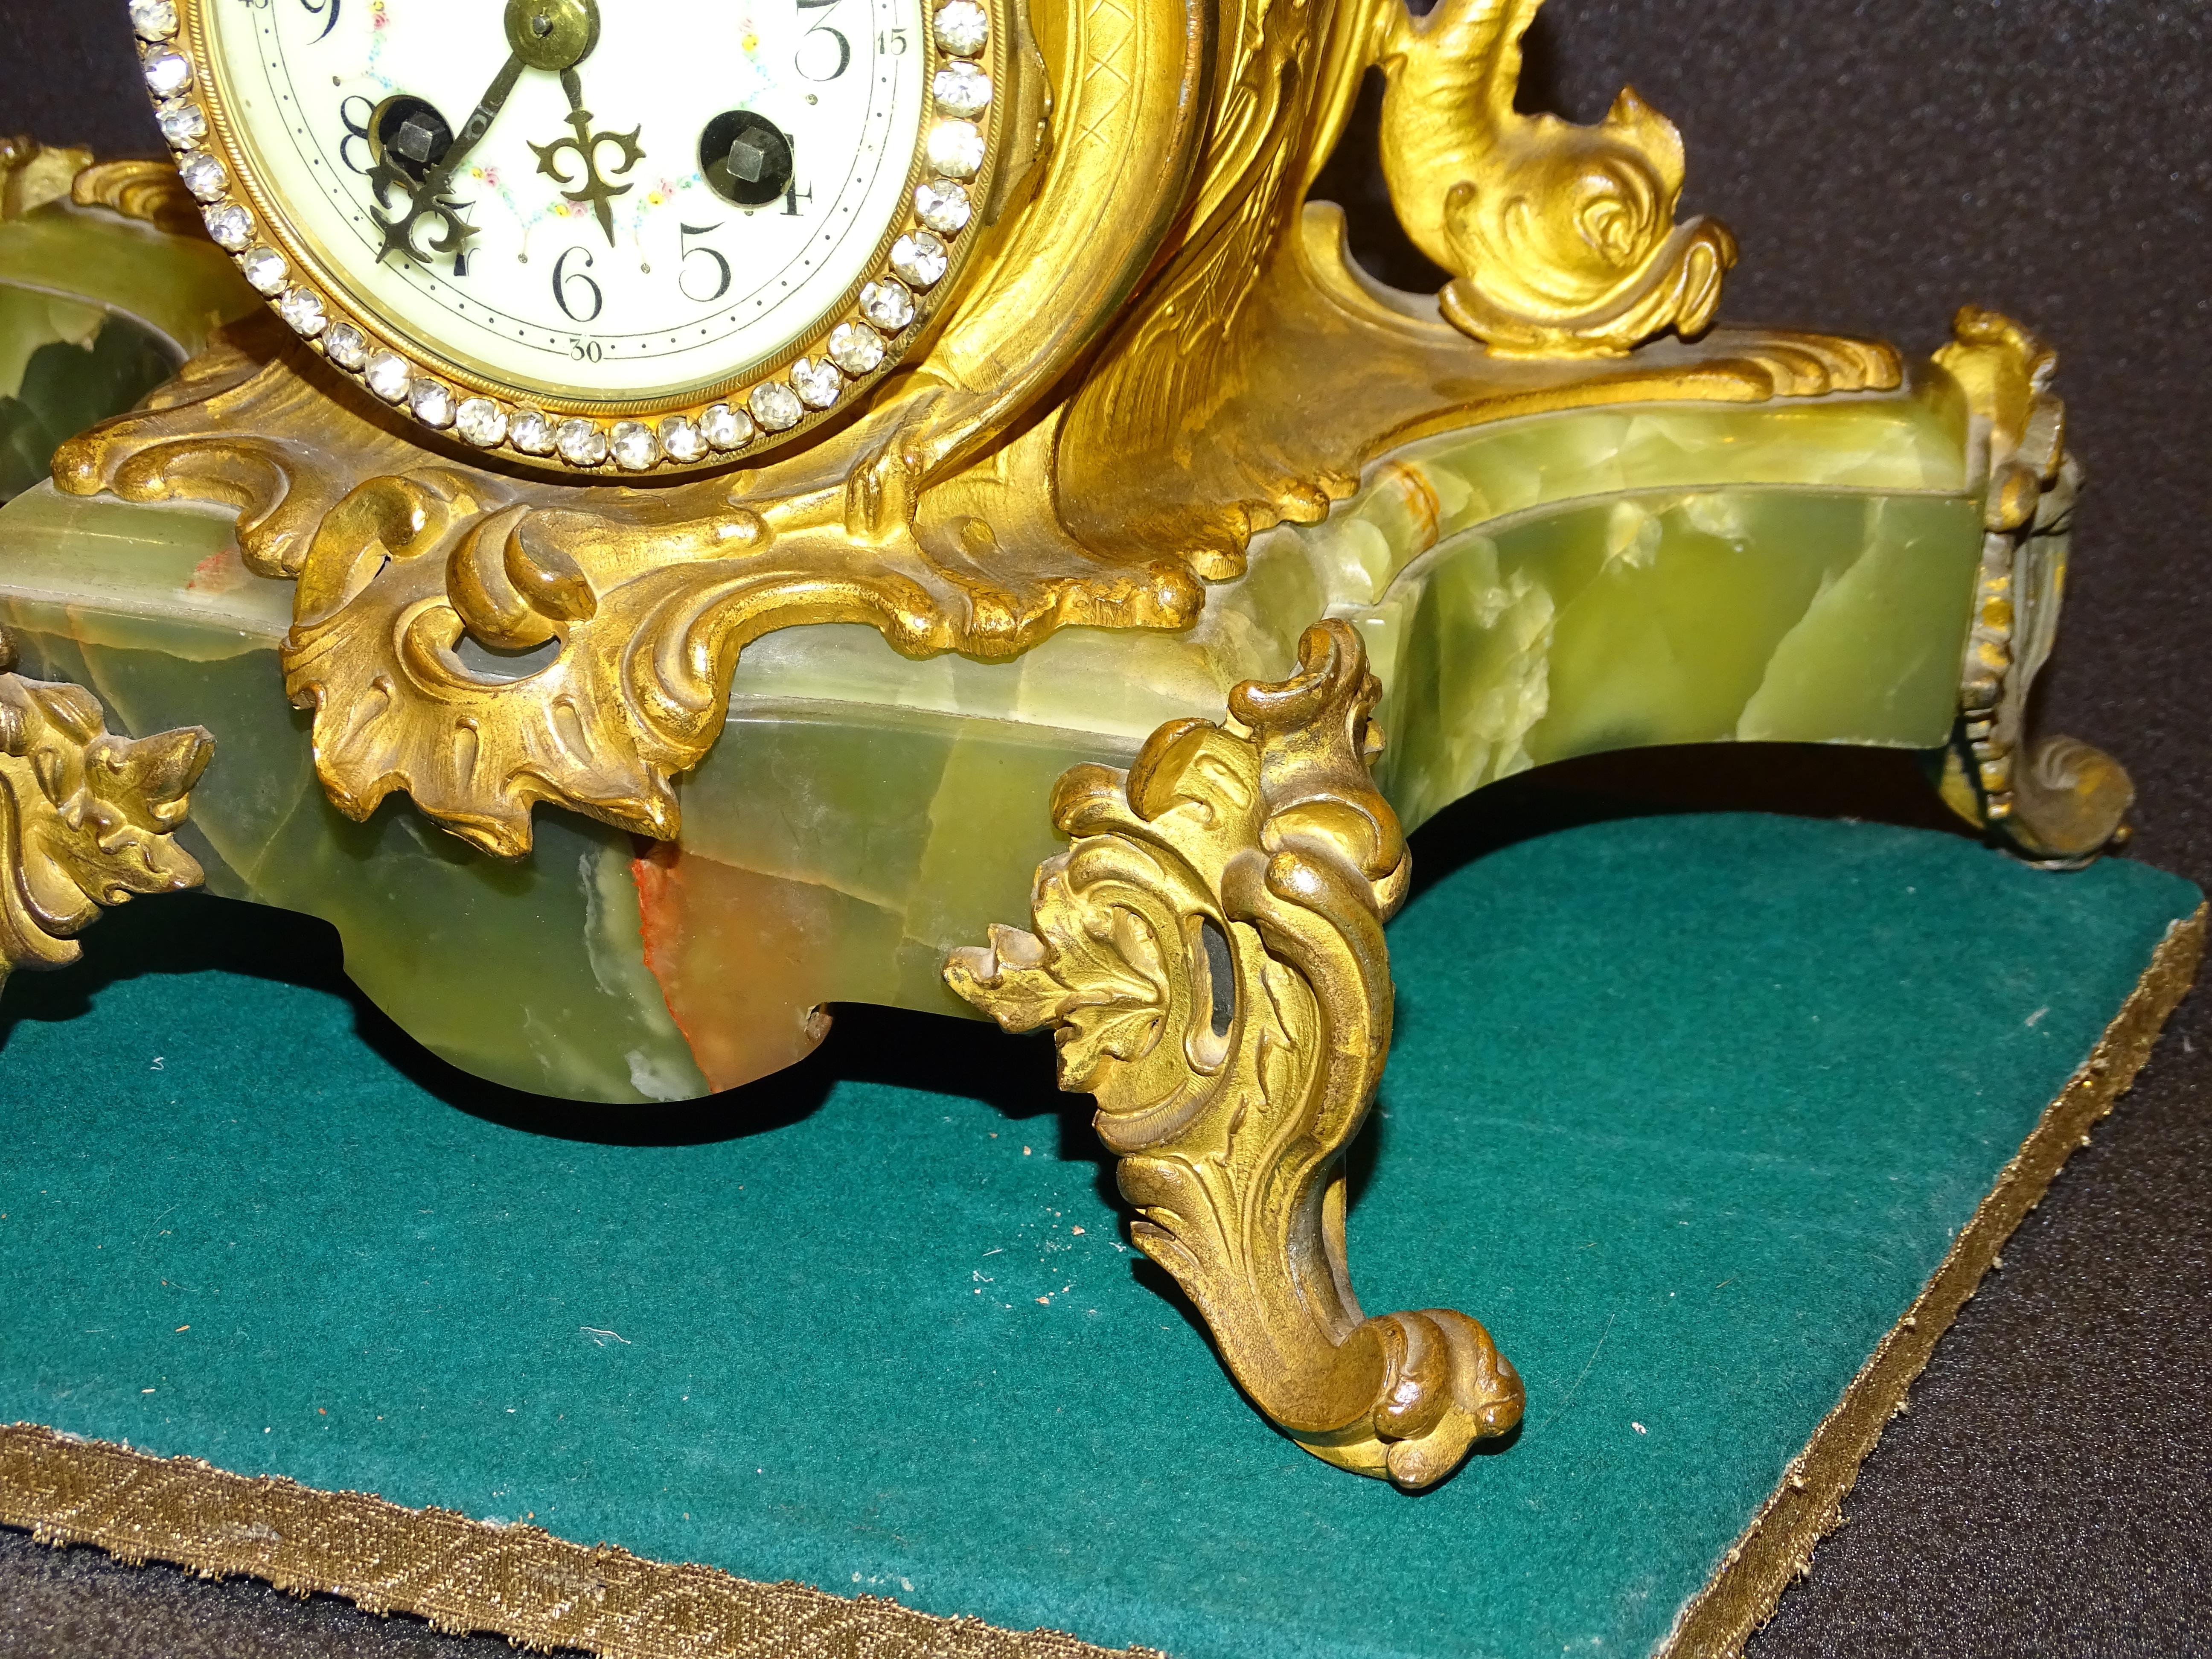 Mid-19th Century 19thcenturyfrench Mantelclock Sculpture Moureau, Bronce and Marble